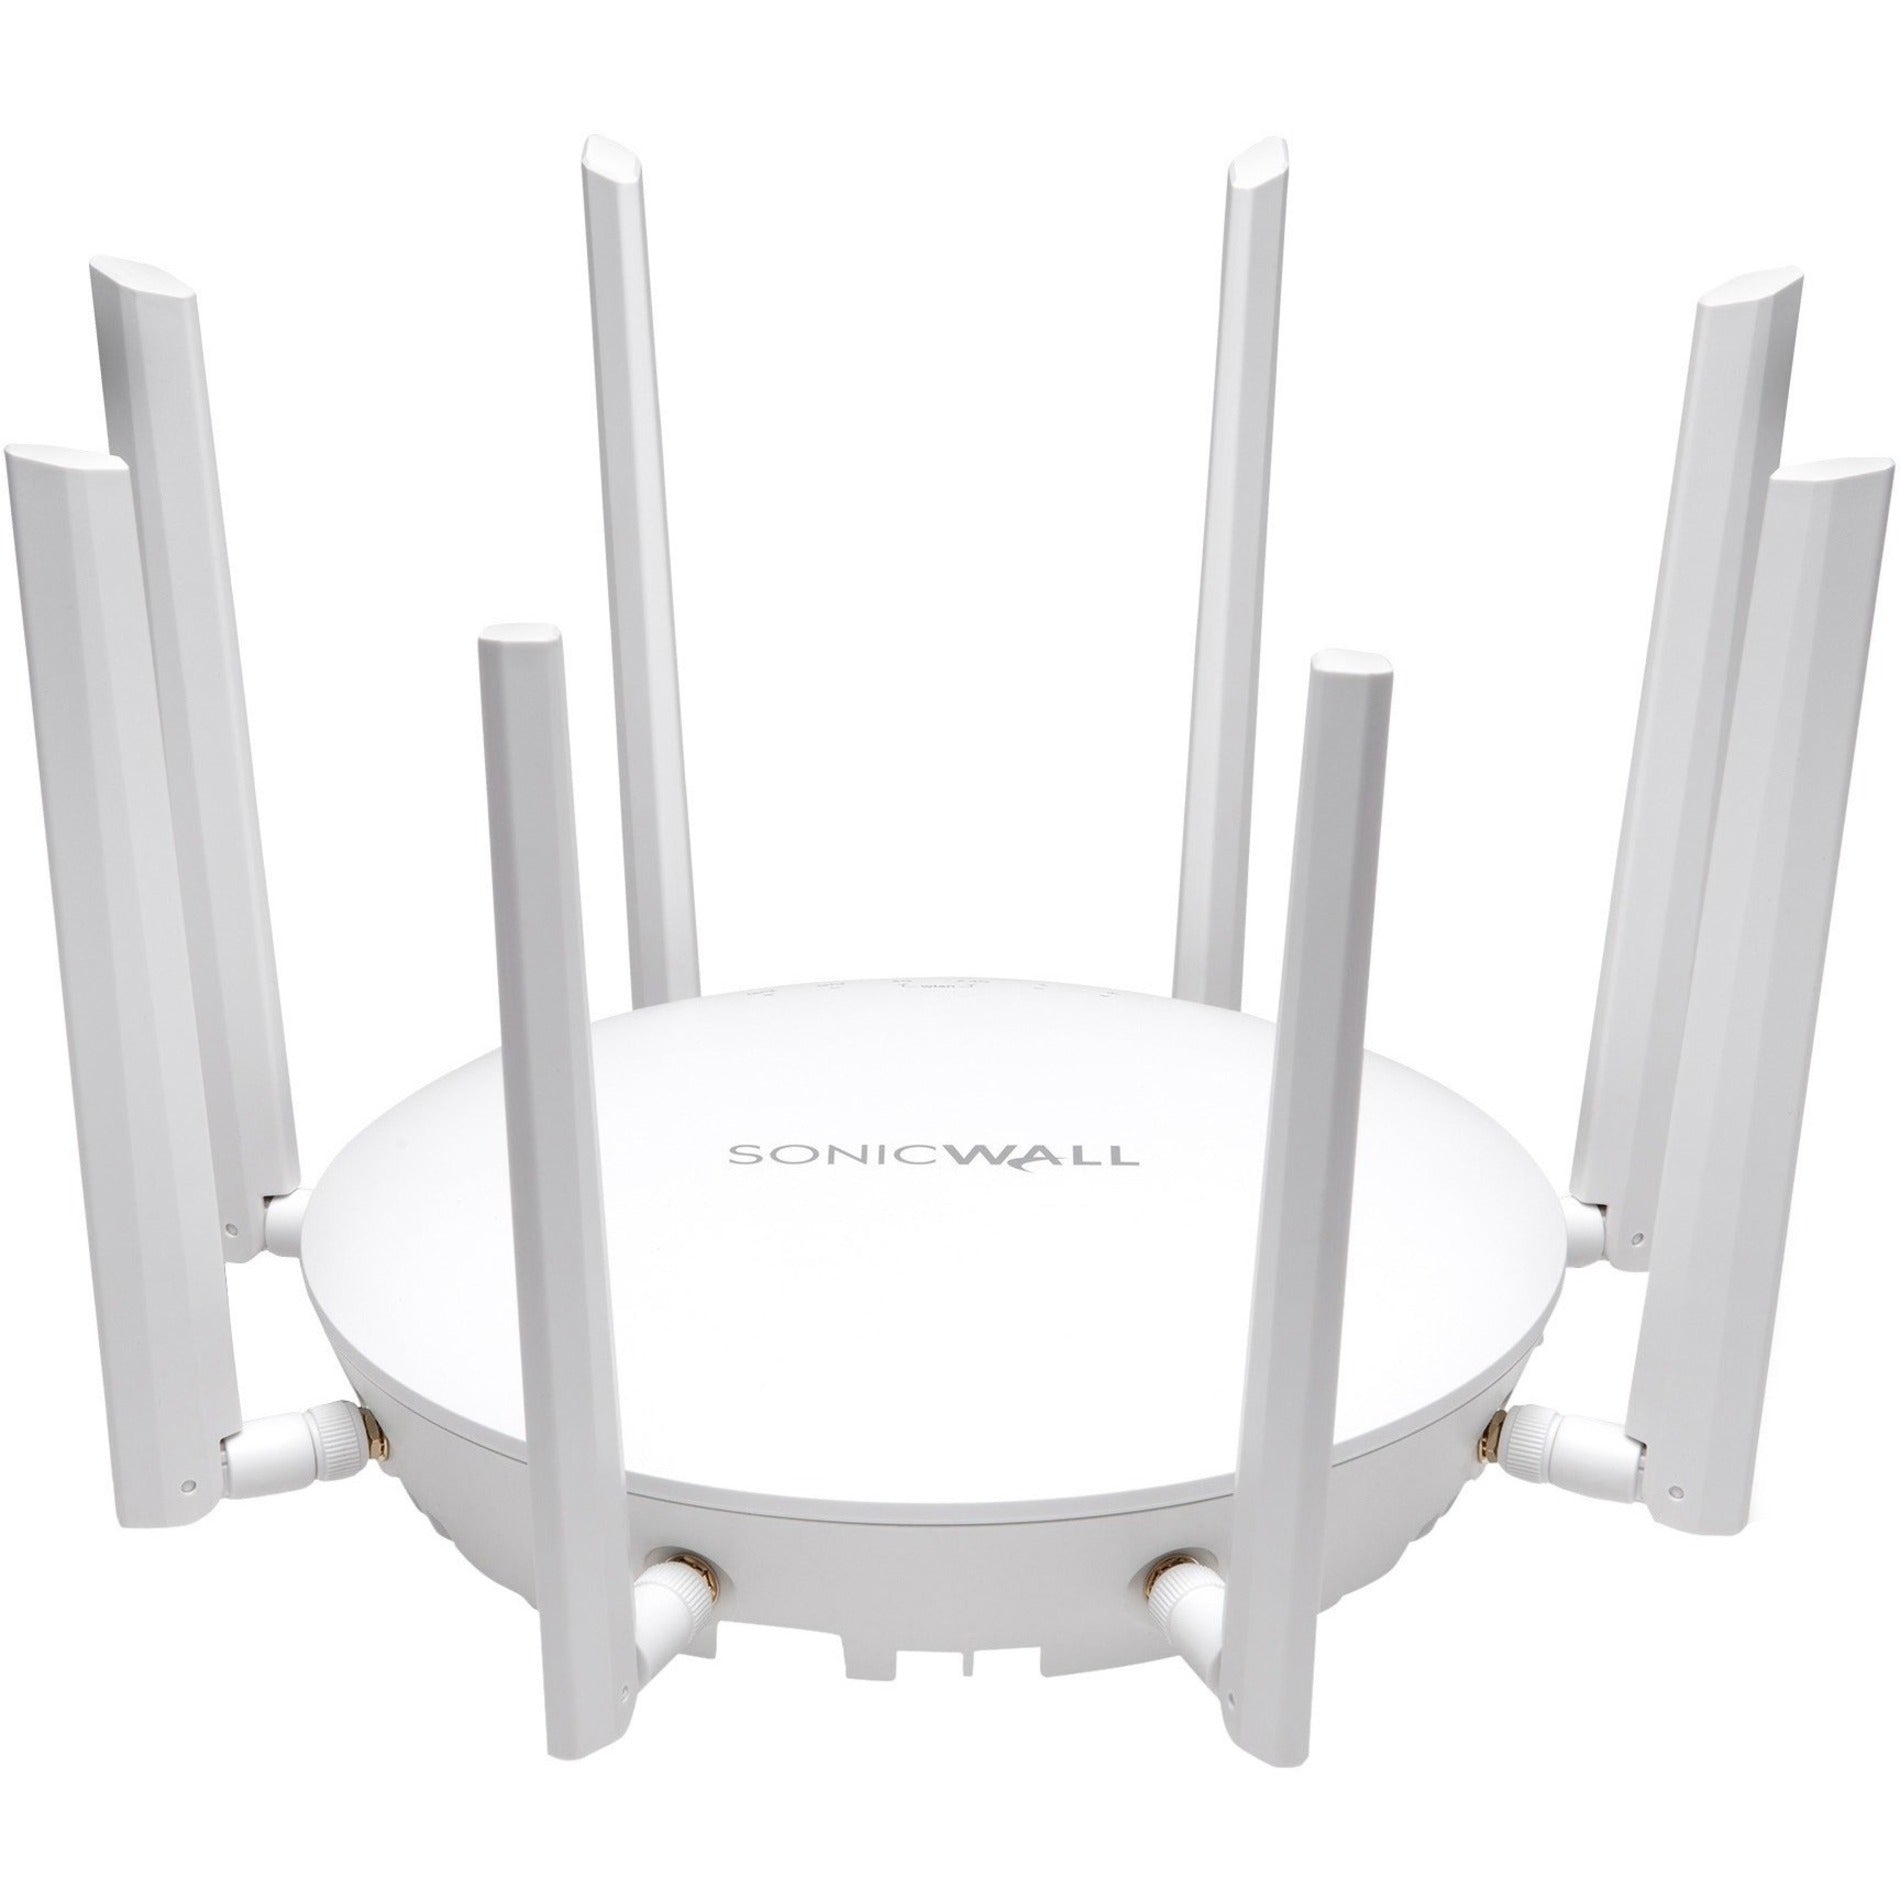 SonicWall 01-SSC-2494 SonicWave 432i Wireless Access Point, 3-Year Activation and 24x7 Support